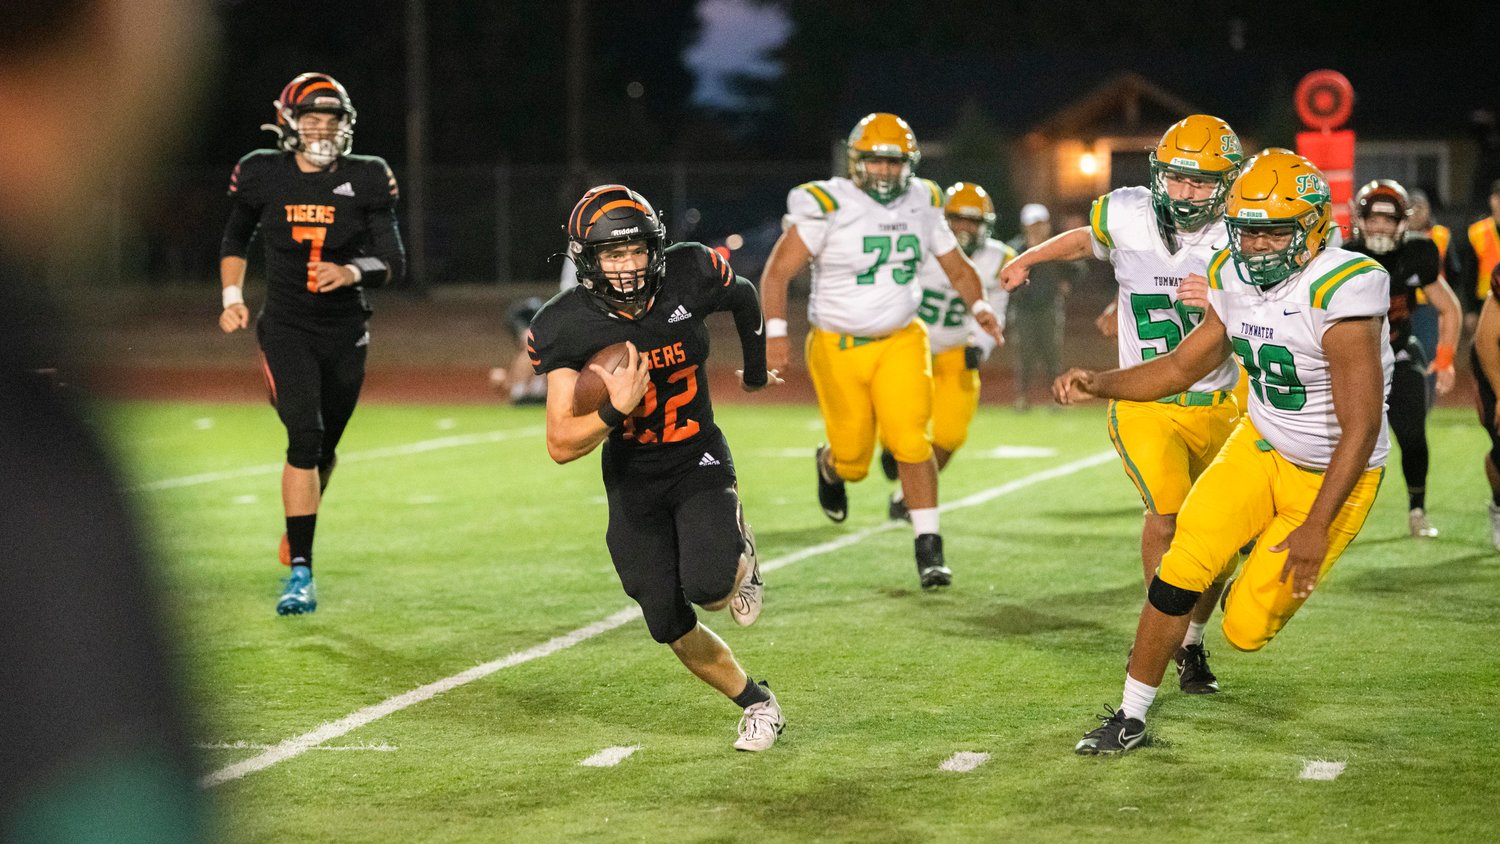 Centralia sophomore Kellen Rooklidge (22) runs with the football during a game against Tumwater Friday night.